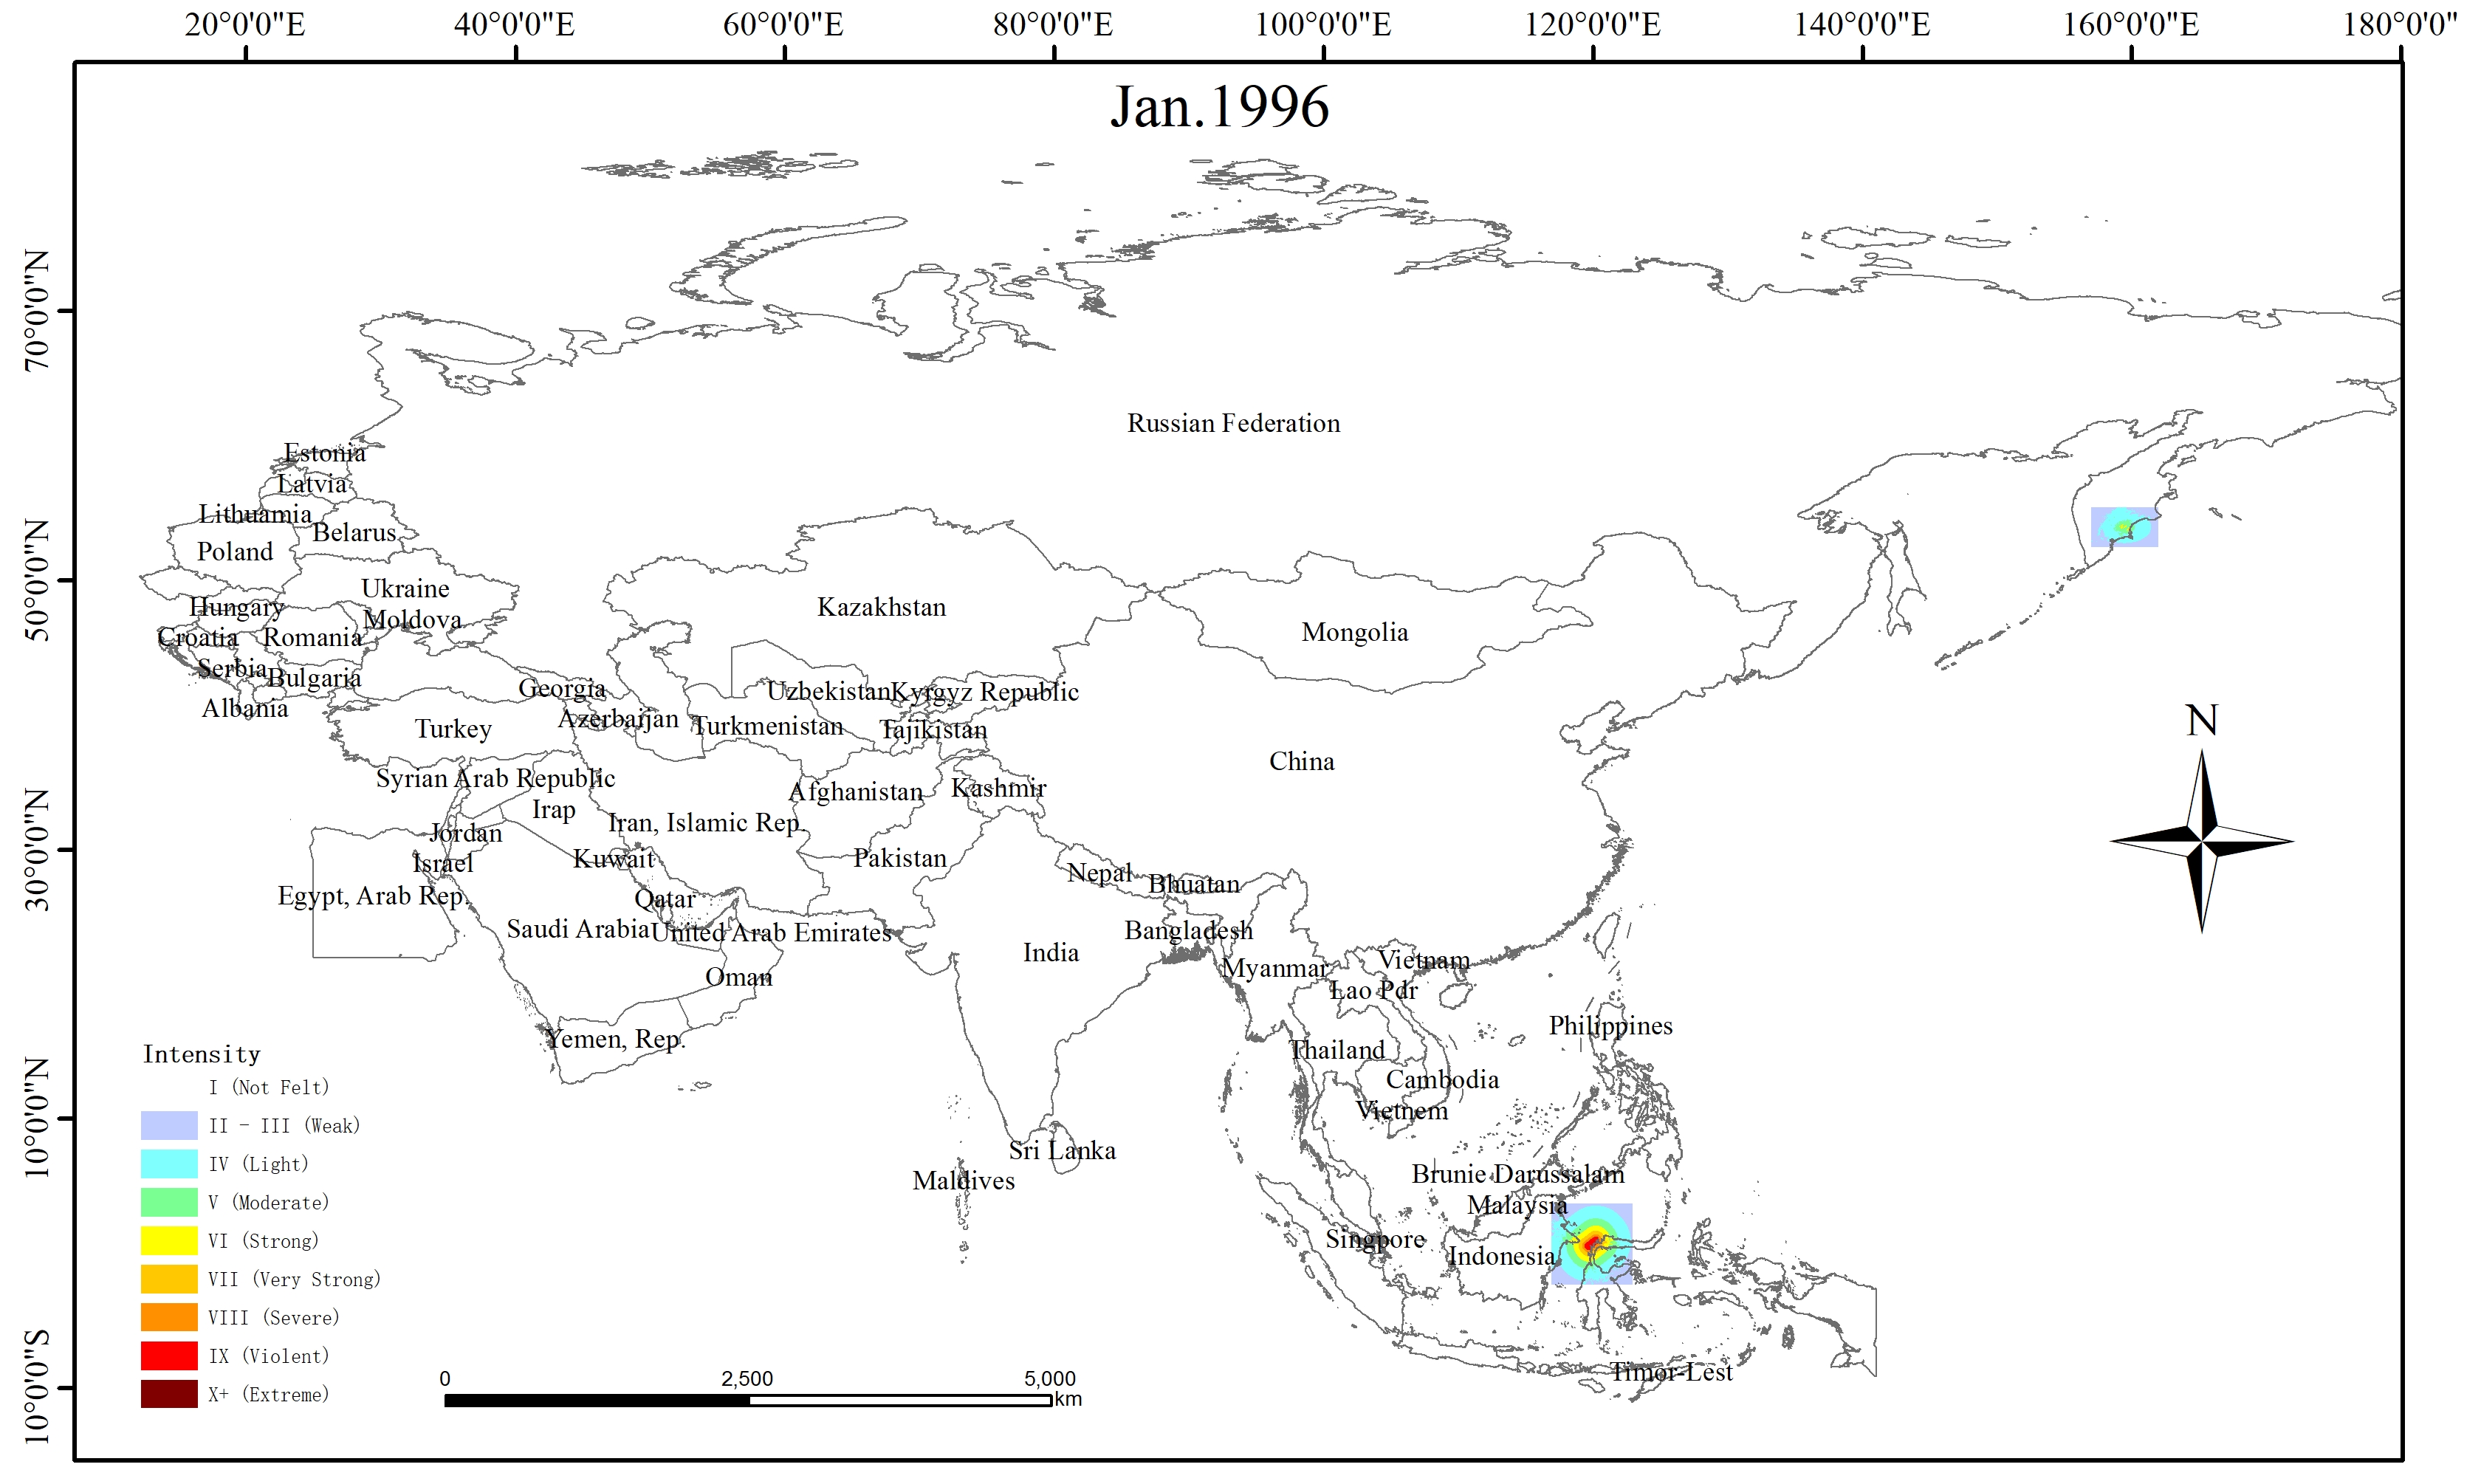 Spatio-temporal Distribution of Earthquake Disaster in the Belt and Road Area in 1996